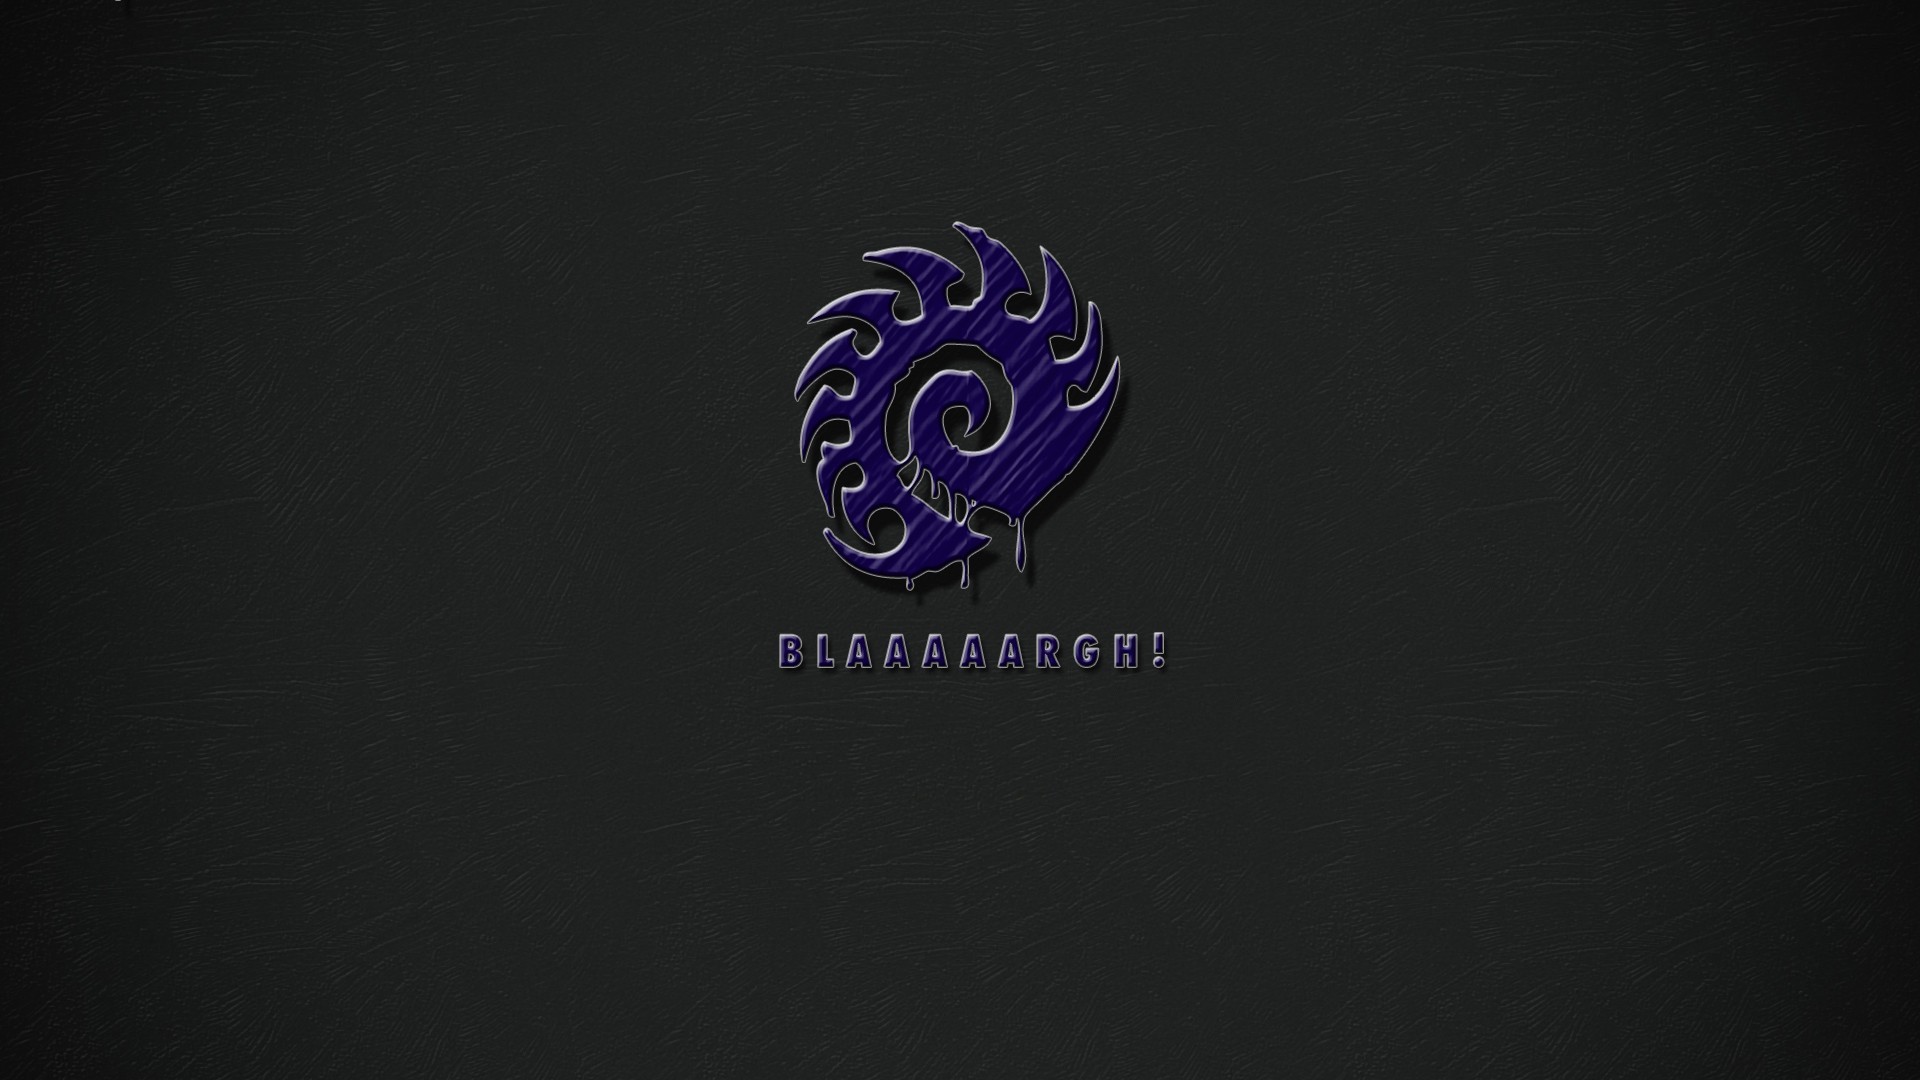 Inspired by the Protoss wallpaper I decided to try make one for Zerg